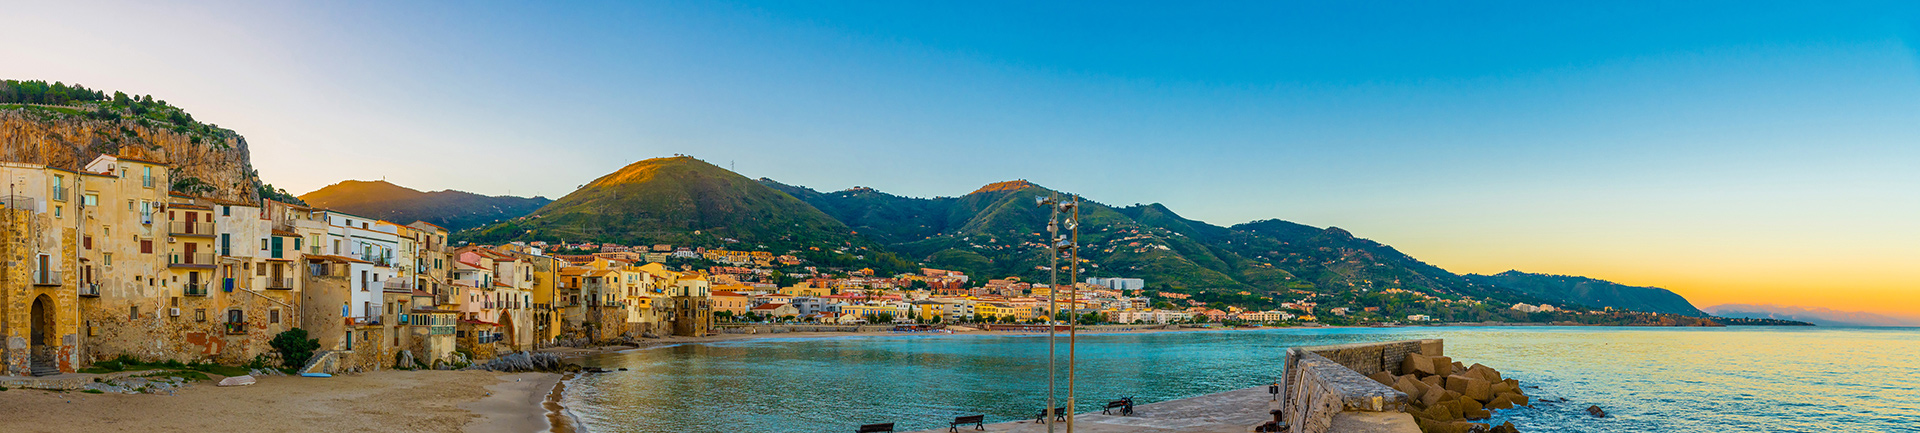 Cefalù,  a melting pot of cultures and legends